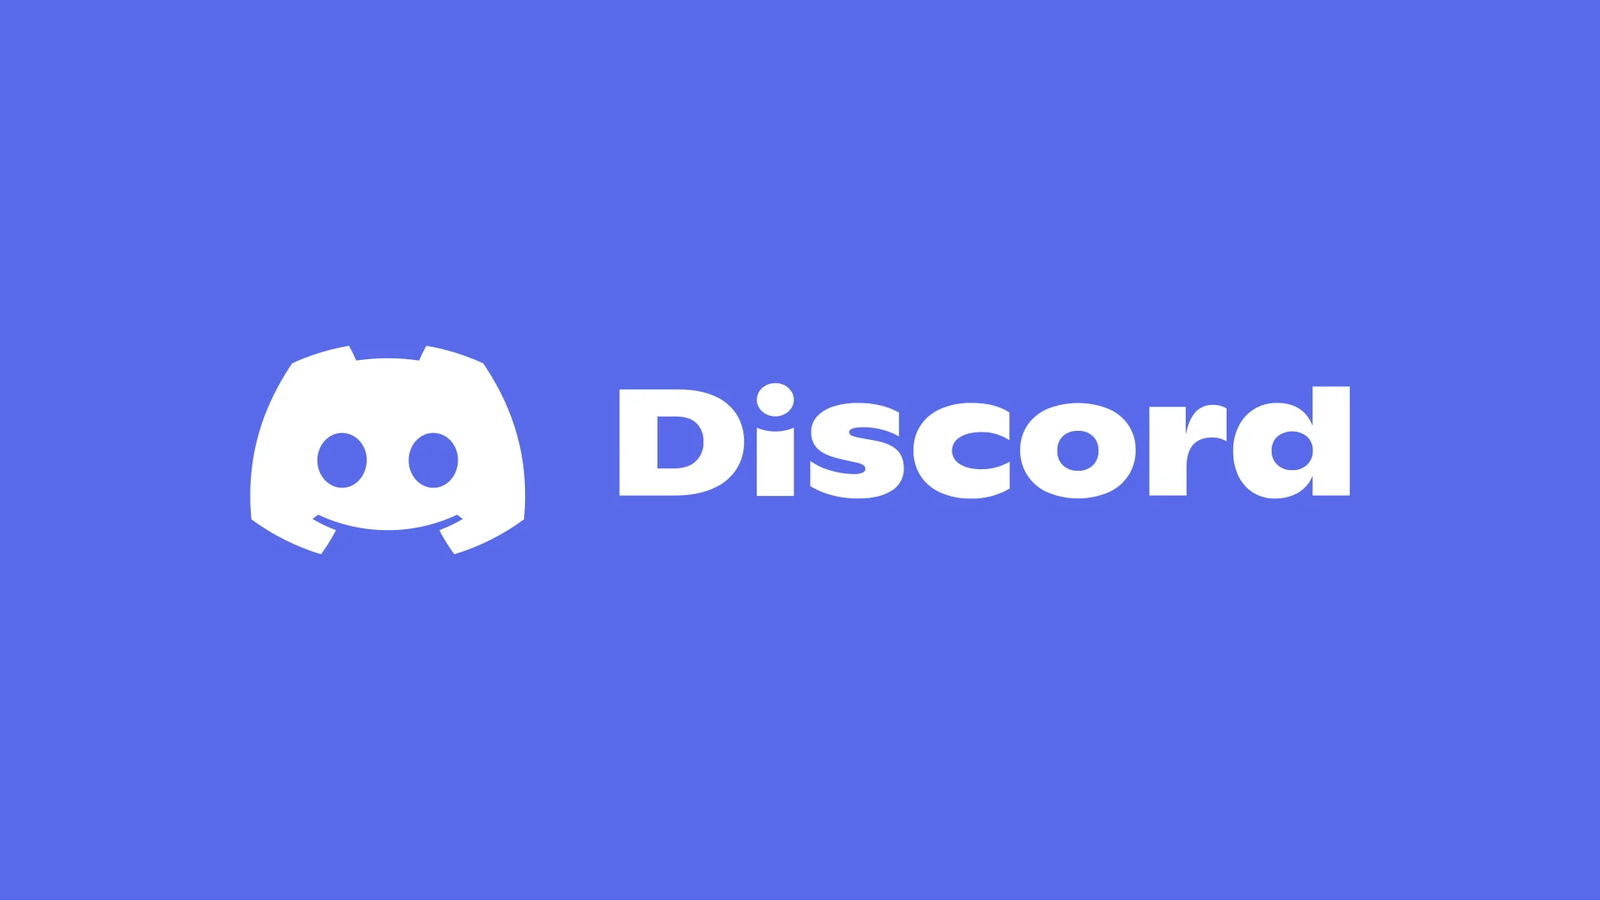 Discord crashing while typing & searching Emotes? Here’s a workaround for you